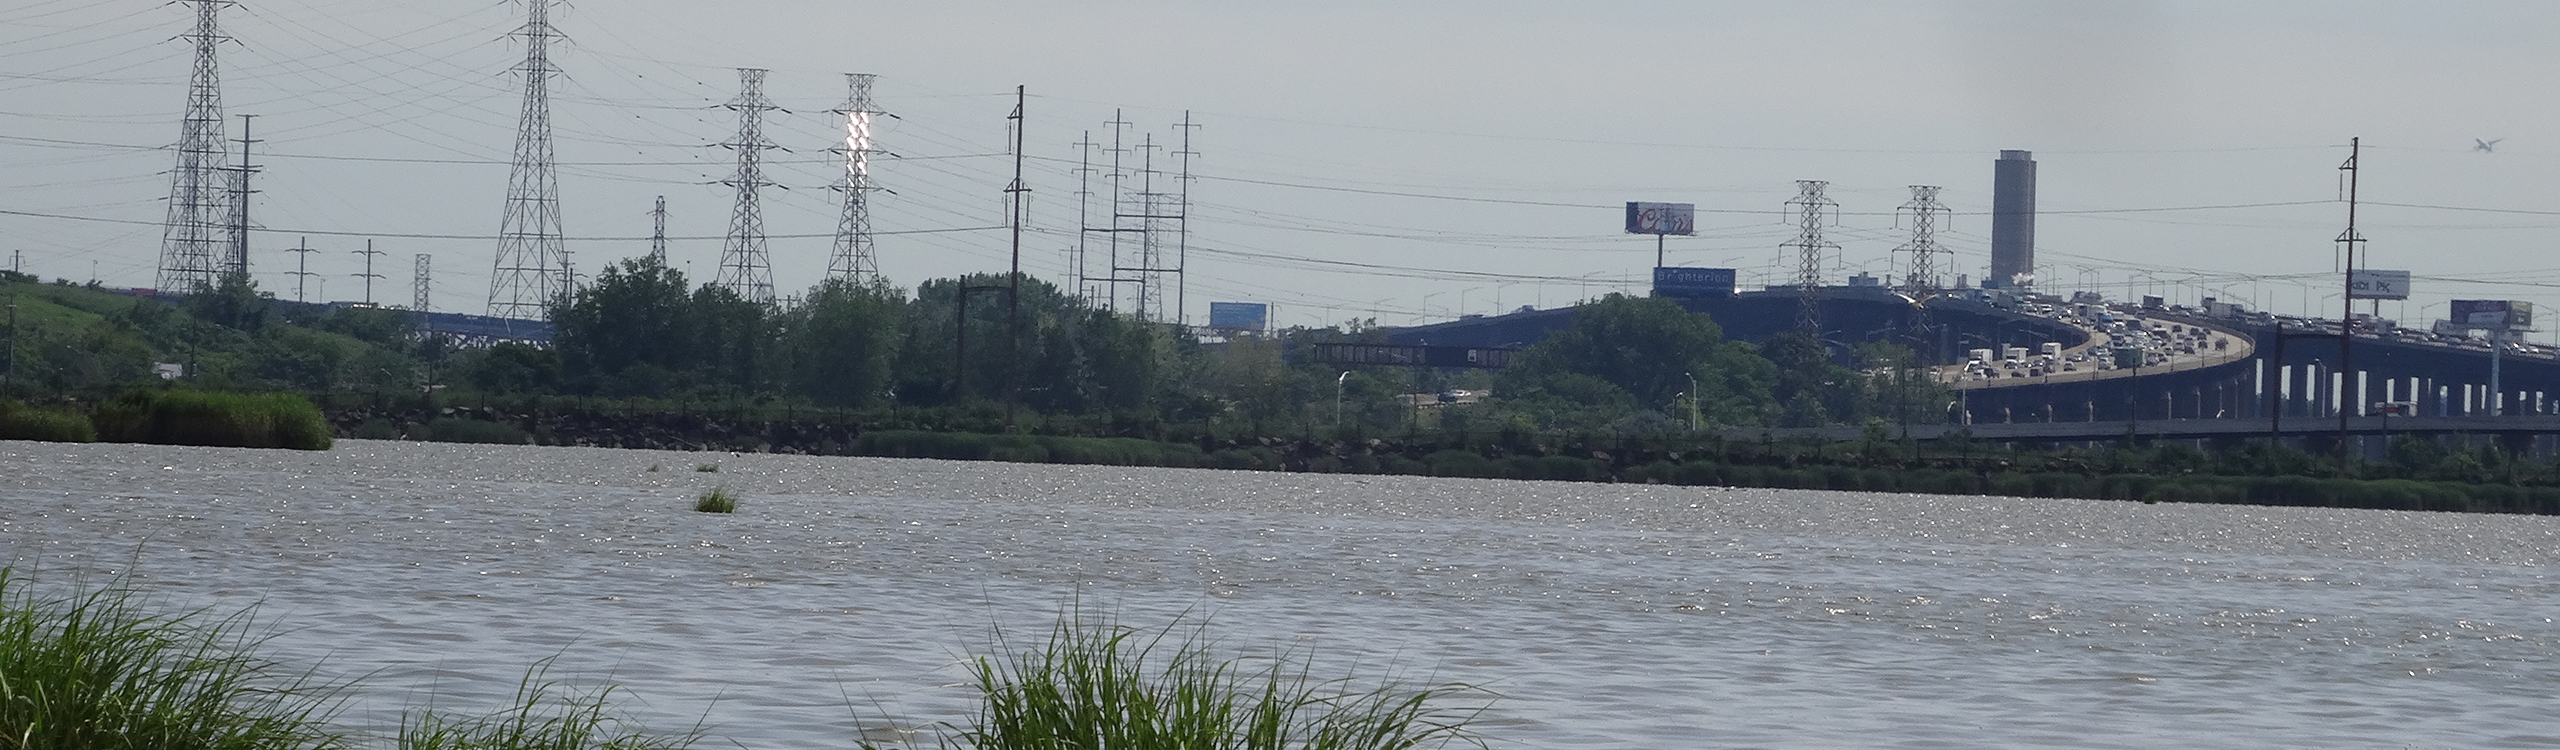 NJDEP Will Pursue Cleanup of Lower Hackensack River as a Federal Superfund Site 